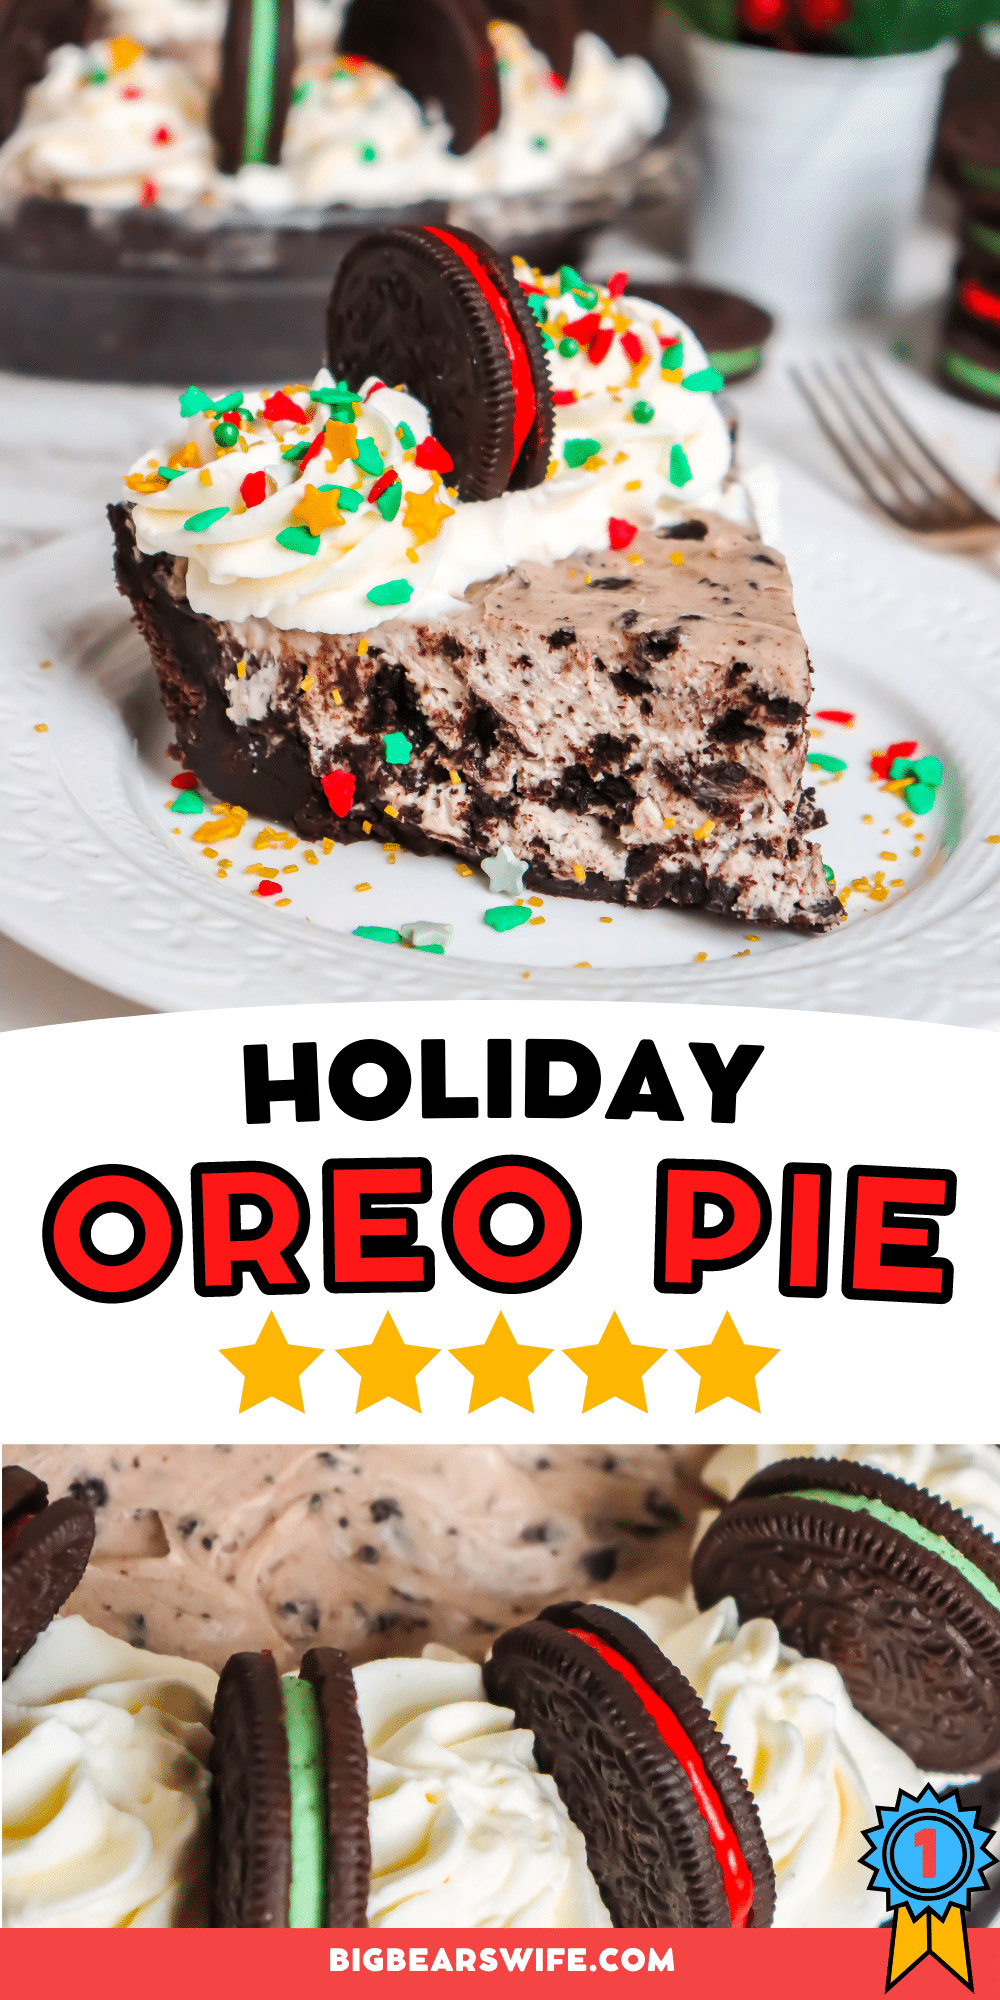 Ready to make a super easy holiday dessert recipe? This Holiday Oreo Pie is a cheesecake pie filled with crushed OREO cookies and topped with Holiday red and green OREO cookies and holiday sprinkles.  via @bigbearswife